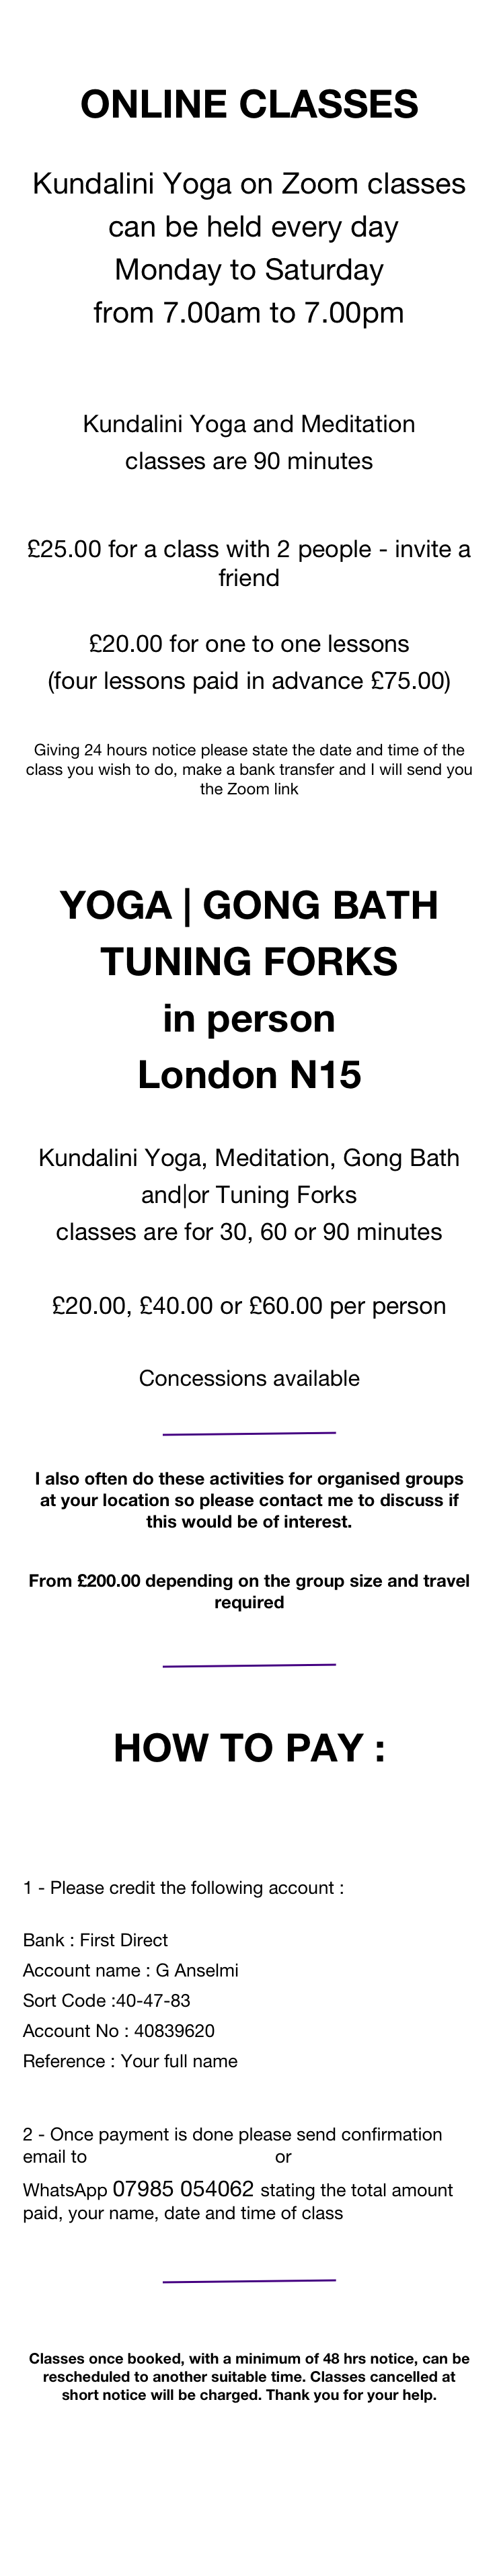 

ONLINE CLASSES

Kundalini Yoga on Zoom classes
 can be held every day 
Monday to Saturday
from 7.00am to 7.00pm 

Kundalini Yoga and Meditation
classes are 90 minutes
 
£25.00 for a class with 2 people - invite a friend
 £20.00 for one to one lessons
(four lessons paid in advance £75.00)

Giving 24 hours notice please state the date and time of the class you wish to do, make a bank transfer and I will send you the Zoom link


YOGA | GONG BATH
TUNING FORKS
in person 
London N15

Kundalini Yoga, Meditation, Gong Bath
and|or Tuning Forks
classes are for 30, 60 or 90 minutes

£20.00, £40.00 or £60.00 per person

Concessions available 

￼
 I also often do these activities for organised groups  at your location so please contact me to discuss if this would be of interest.

From £200.00 depending on the group size and travel required

￼  
HOW TO PAY :



1 - Please credit the following account : 
Bank : First Direct
Account name : G Anselmi
Sort Code :40-47-83
Account No : 40839620
Reference : Your full name  
2 - Once payment is done please send confirmation email to siriatmas@yahoo.com or 
WhatsApp 07985 054062 stating the total amount paid, your name, date and time of class   
￼


Classes once booked, with a minimum of 48 hrs notice, can be rescheduled to another suitable time. Classes cancelled at short notice will be charged. Thank you for your help.
 


